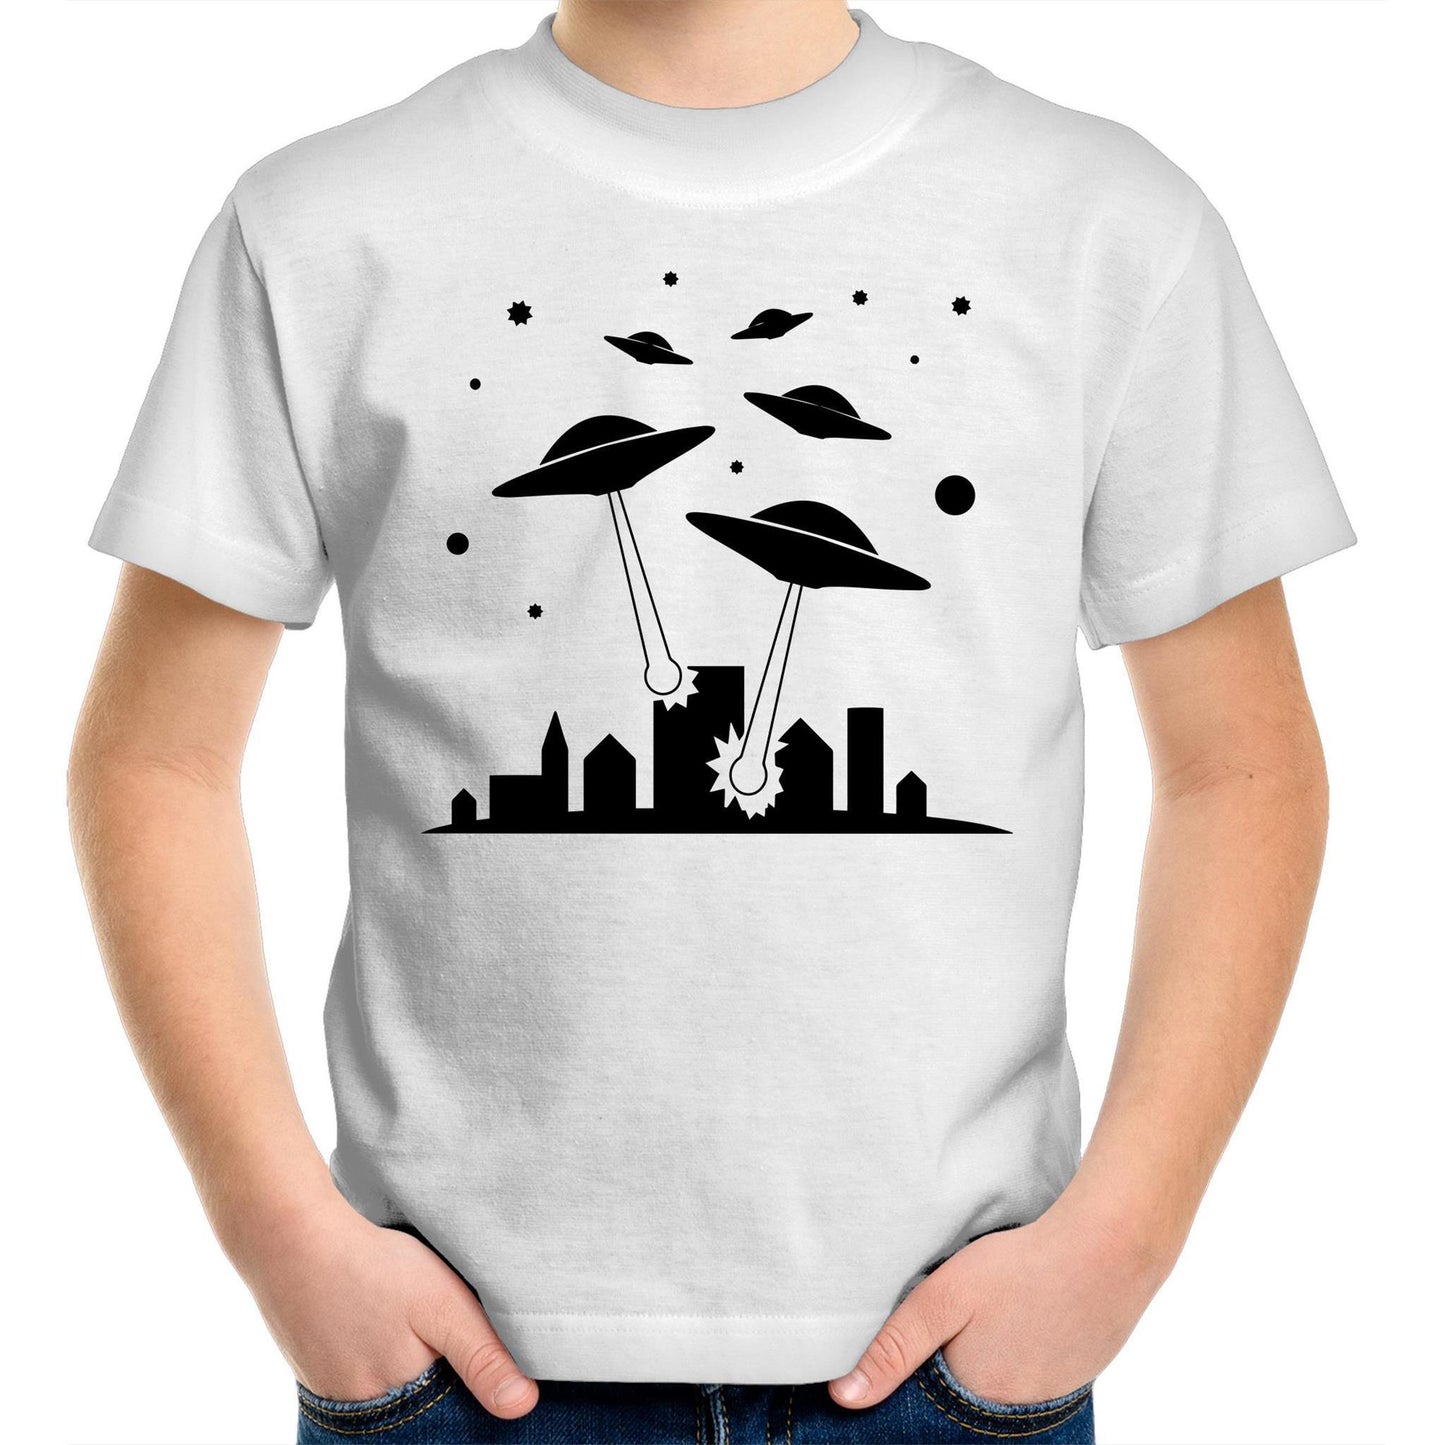 Space Invasion - Kids Youth Crew T-Shirt White Kids Youth T-shirt